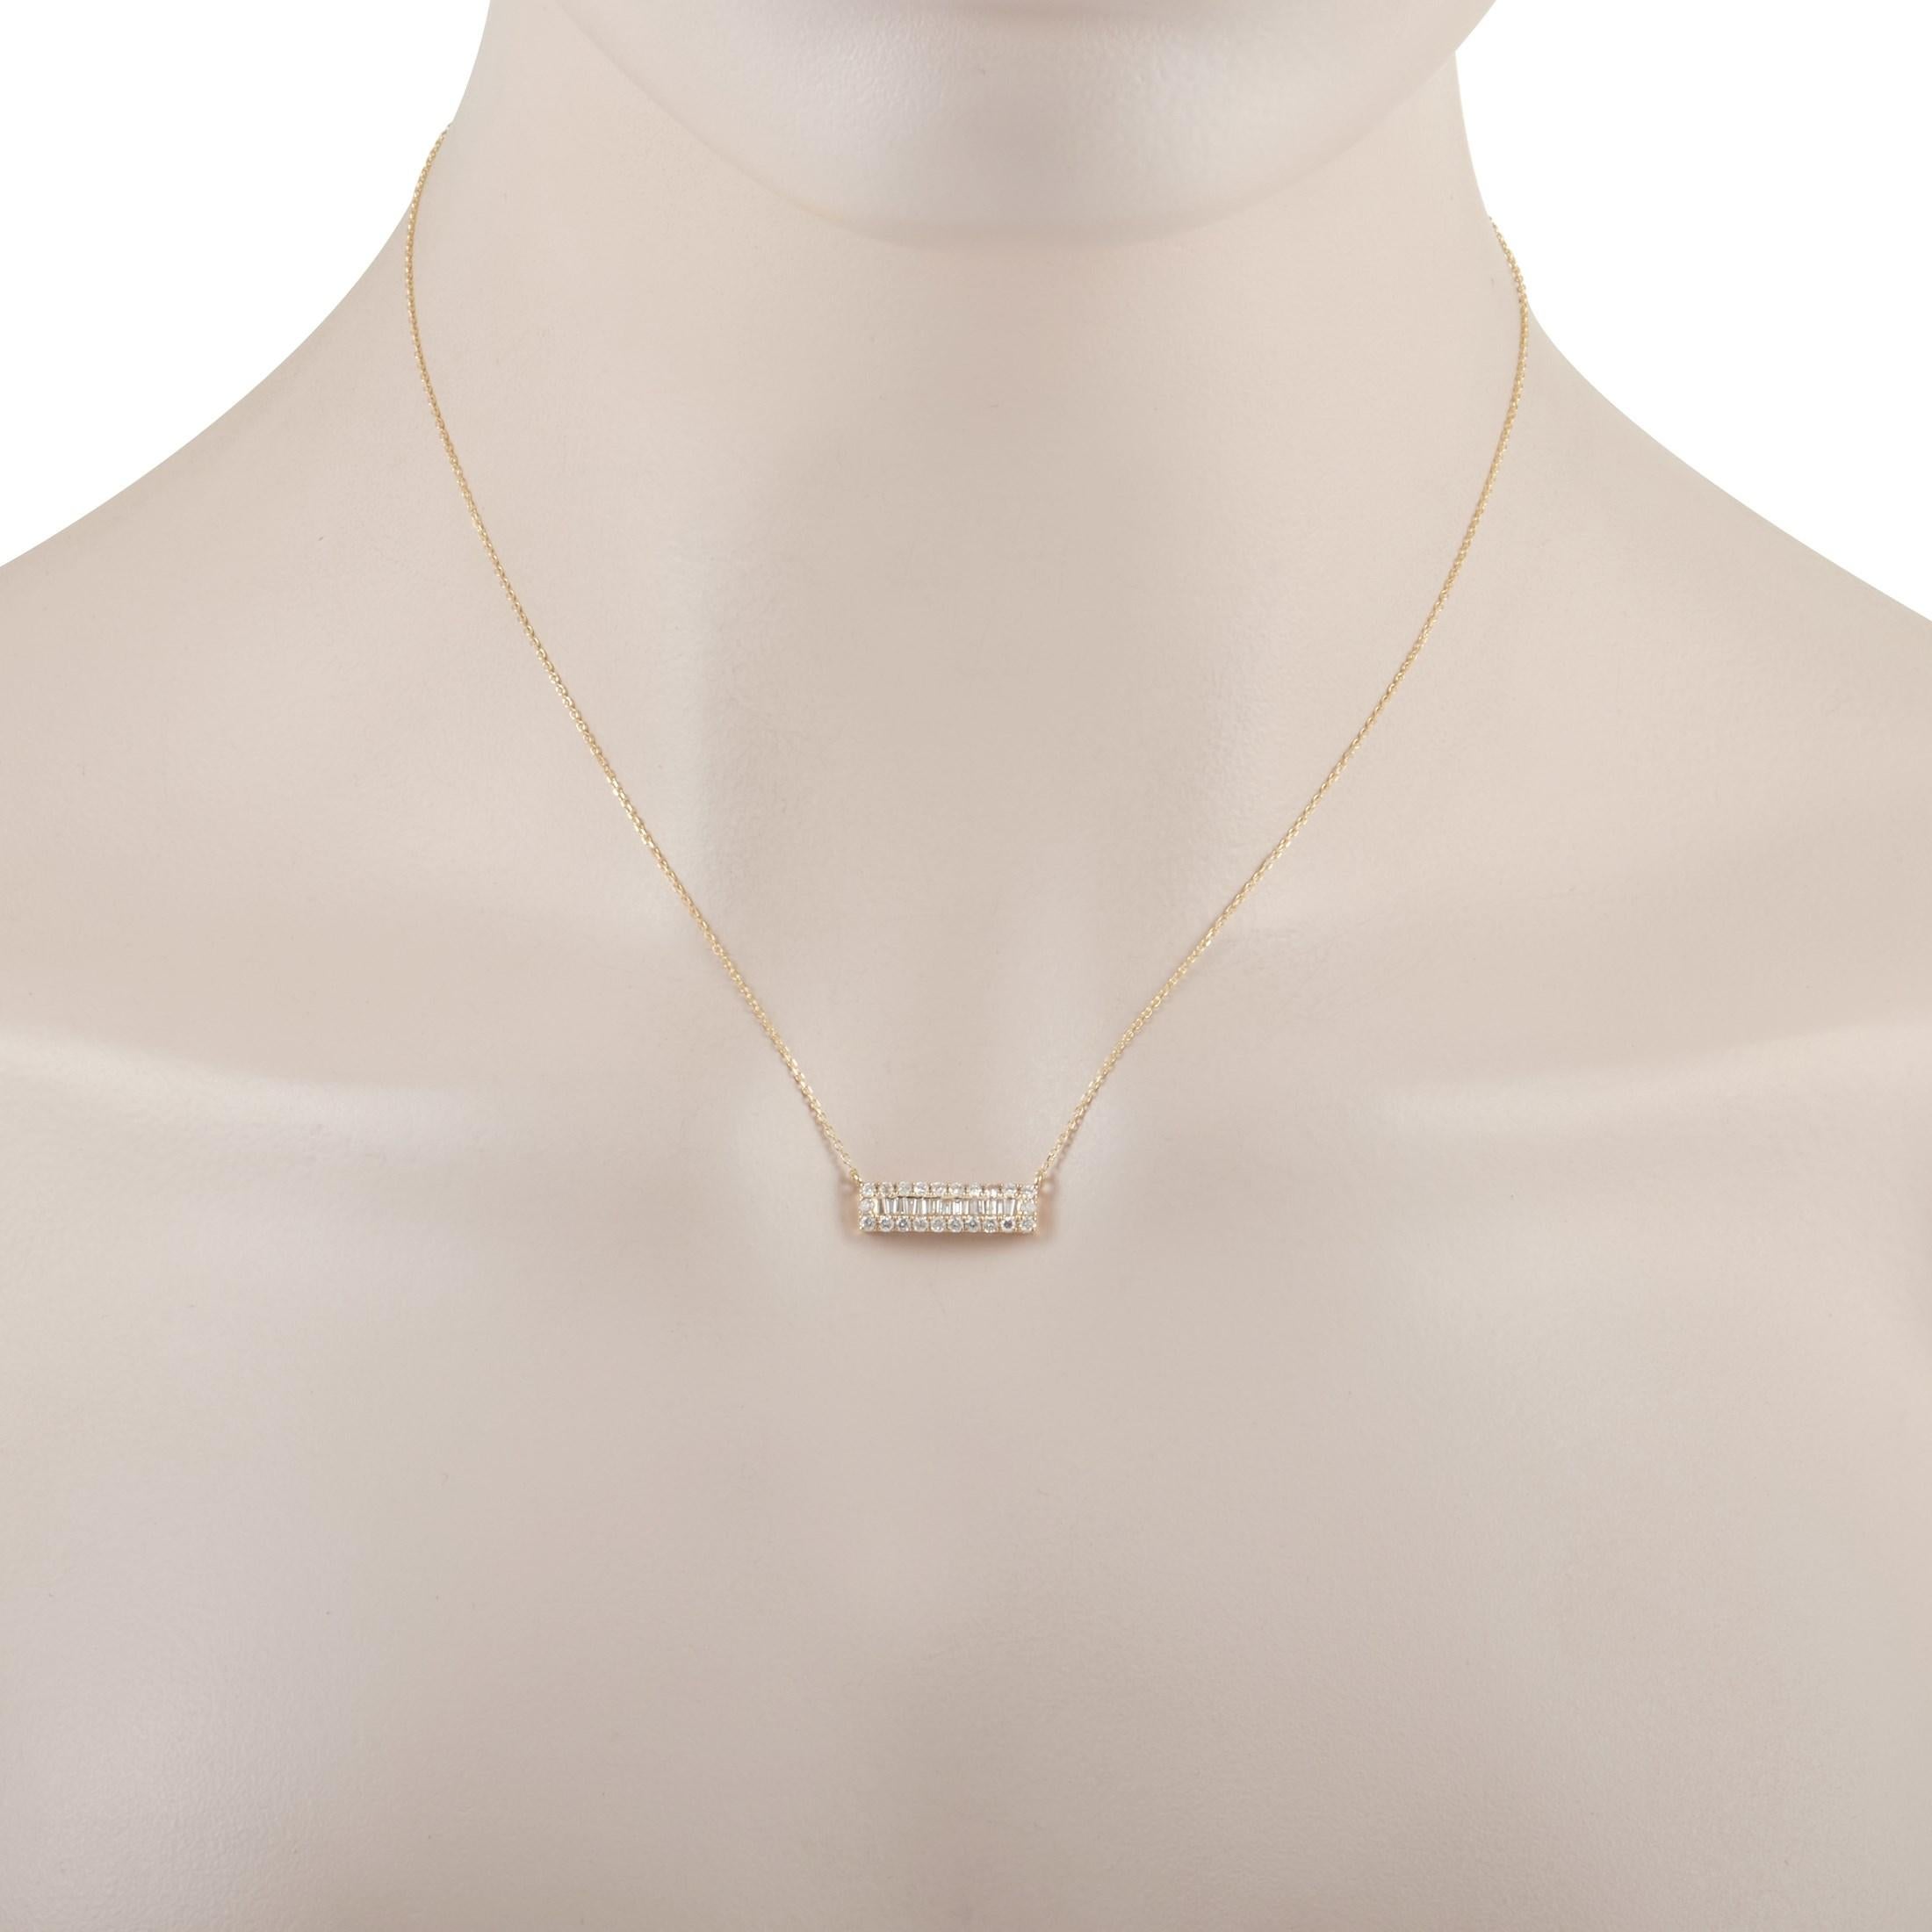 This classy LB Exclusive 14K Yellow Gold 0.50 ct Diamond Bar Pendant Necklace is made with a 14K yellow gold chain and features a yellow gold bar pendant set with a halo of round-diamonds around a row of diamond center stones for a total of 0.50